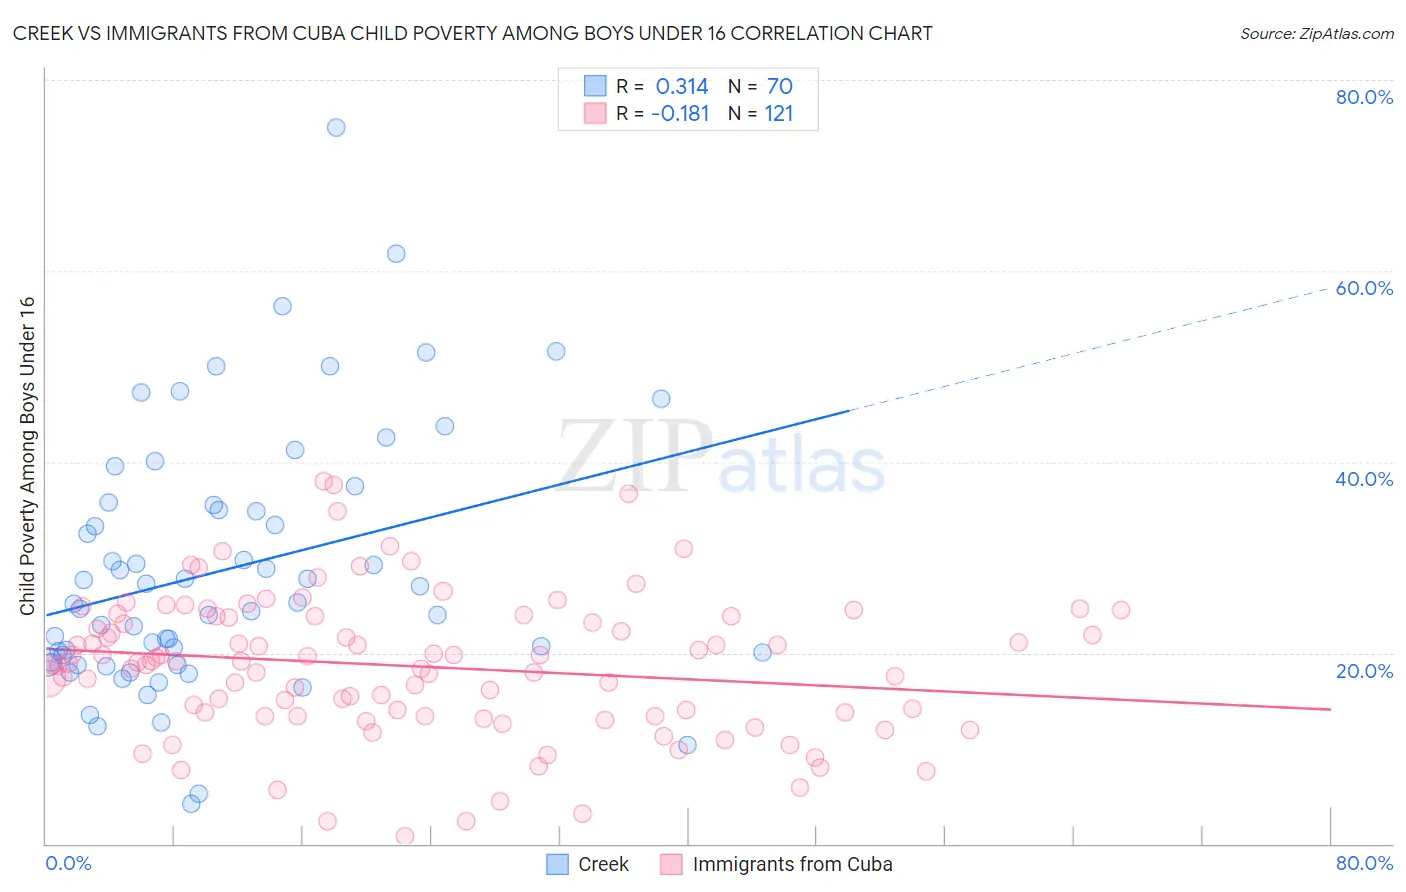 Creek vs Immigrants from Cuba Child Poverty Among Boys Under 16